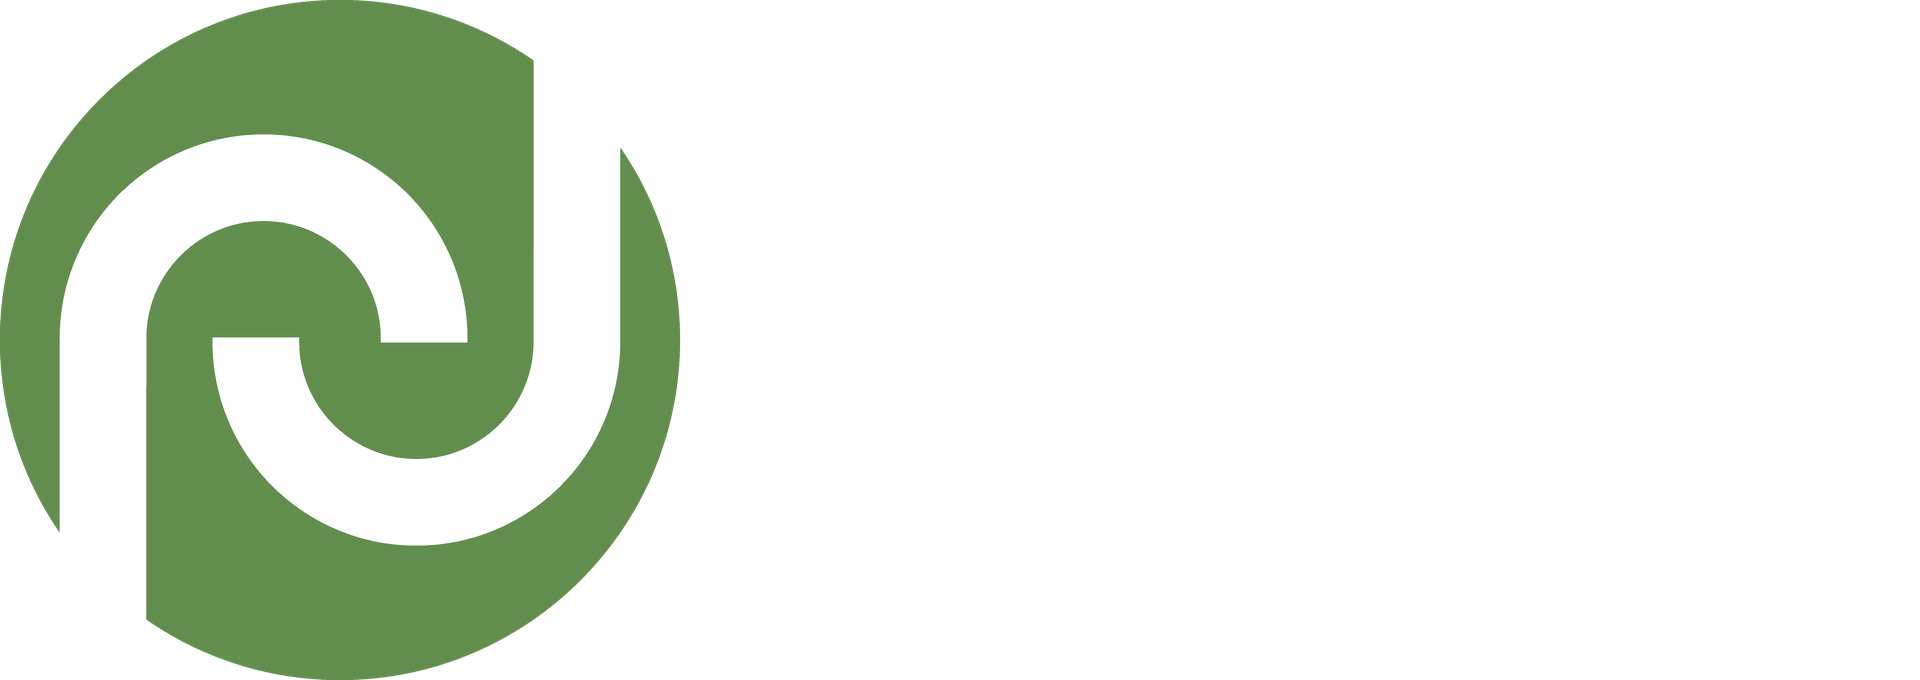 Recycly | IT Asset Disposal Software | ITAD Recycling Management